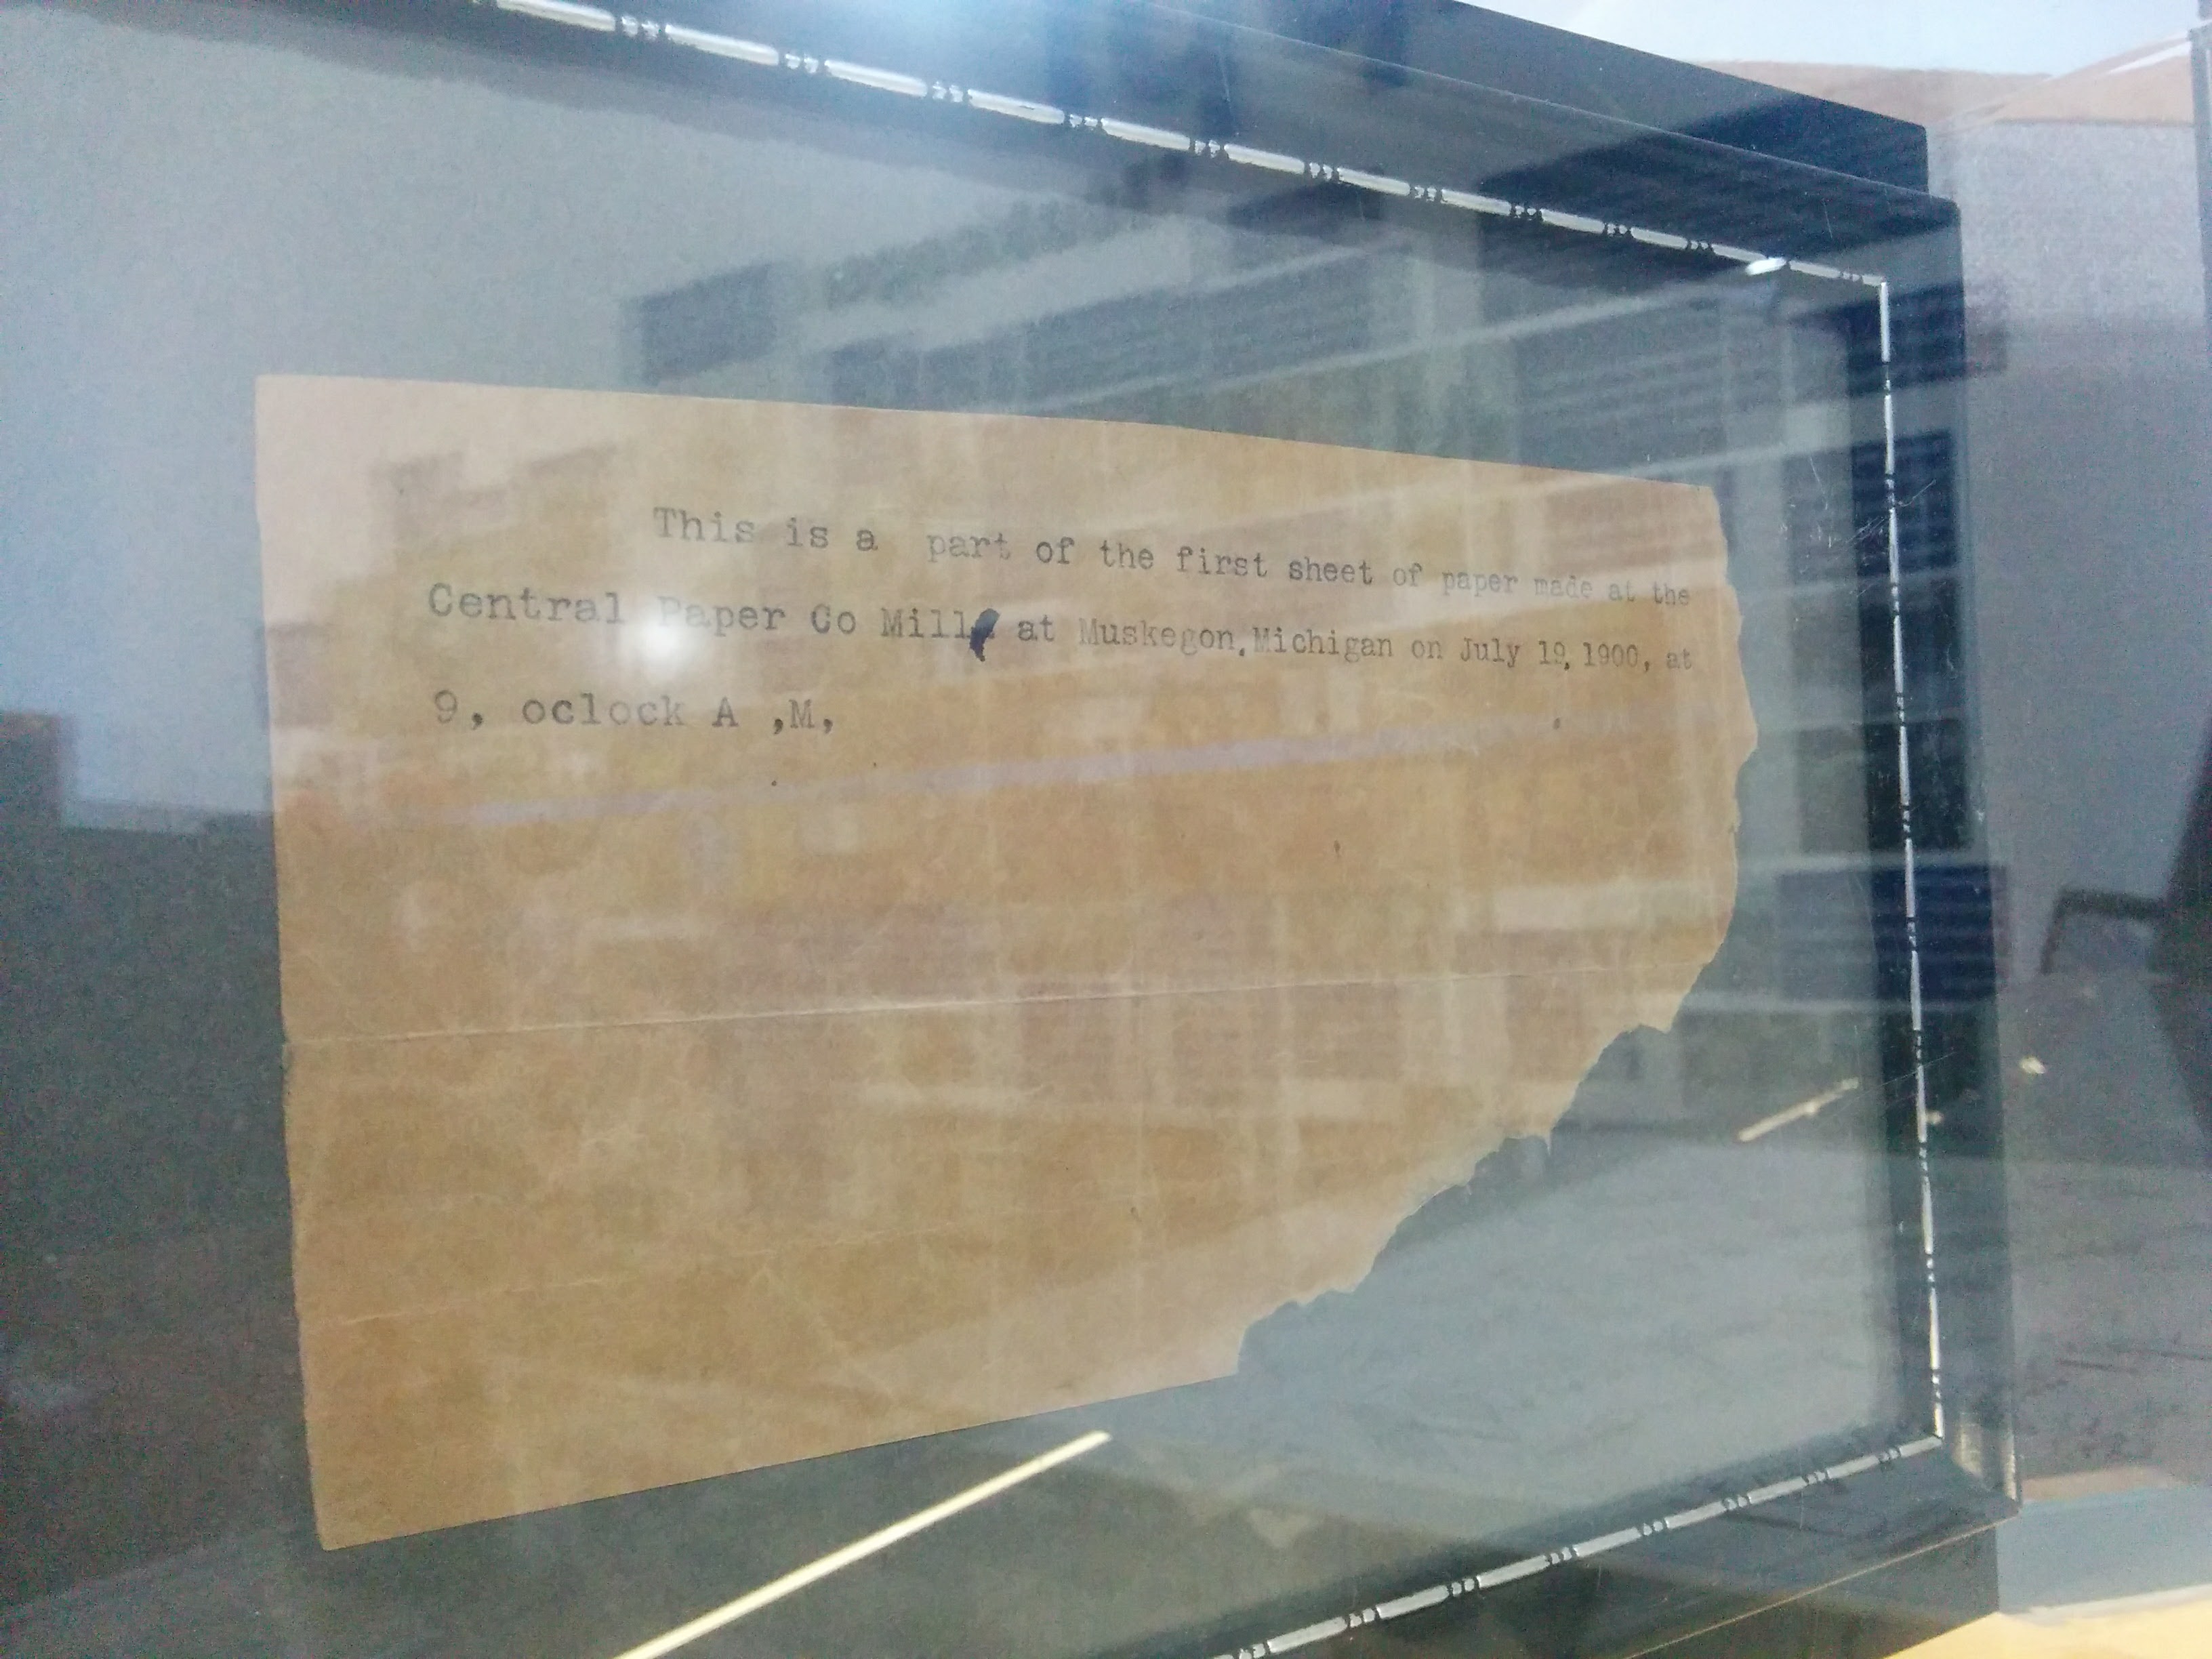 Part of the first piece of paper ever printed at the Central Paper Company mill on July 19, 1900.